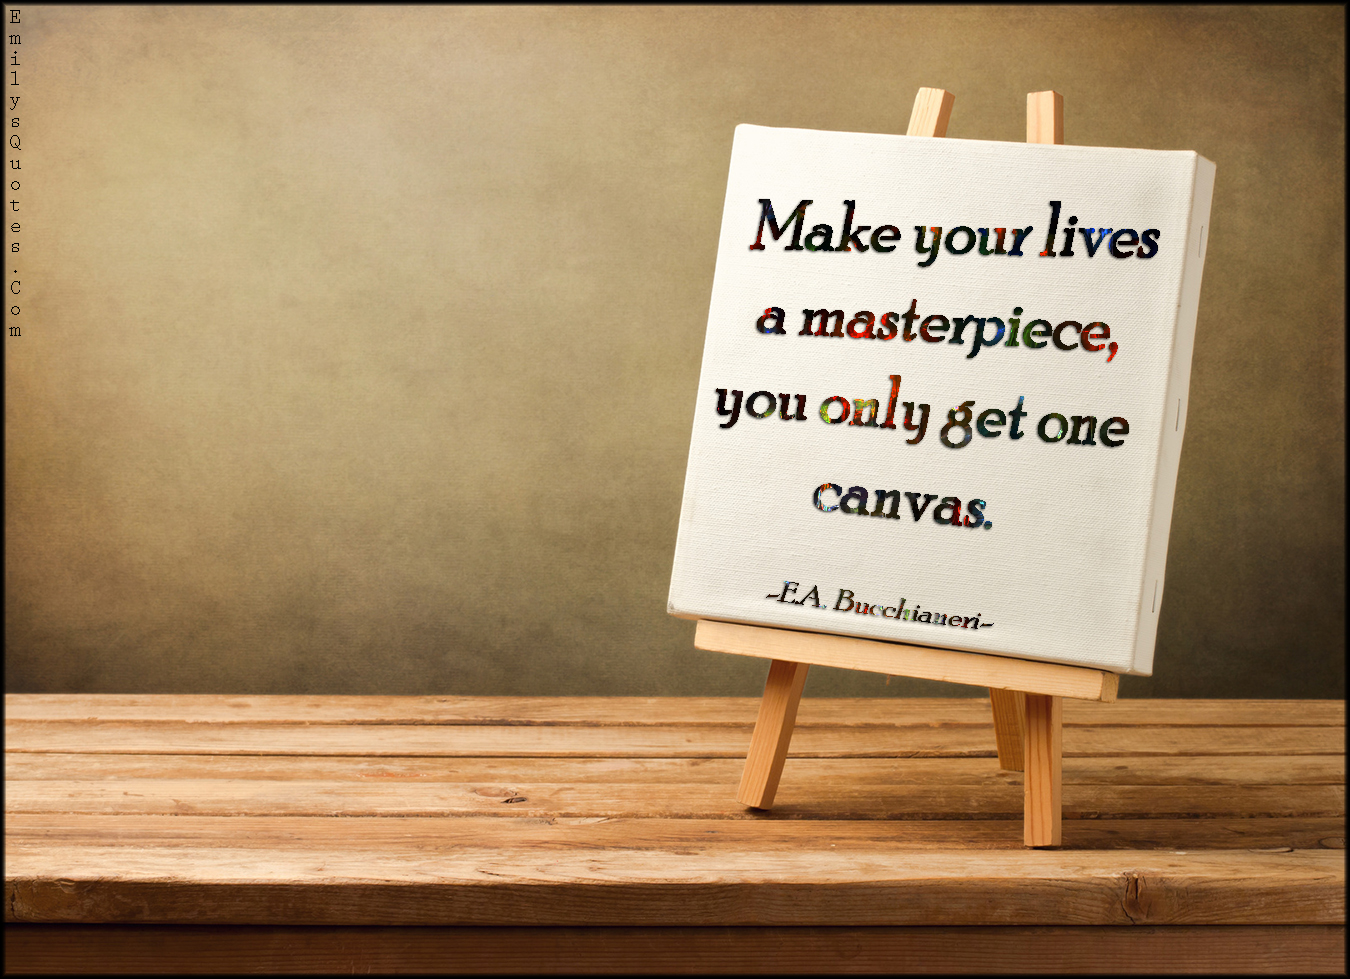 Make your lives a masterpiece, you only get one canvas